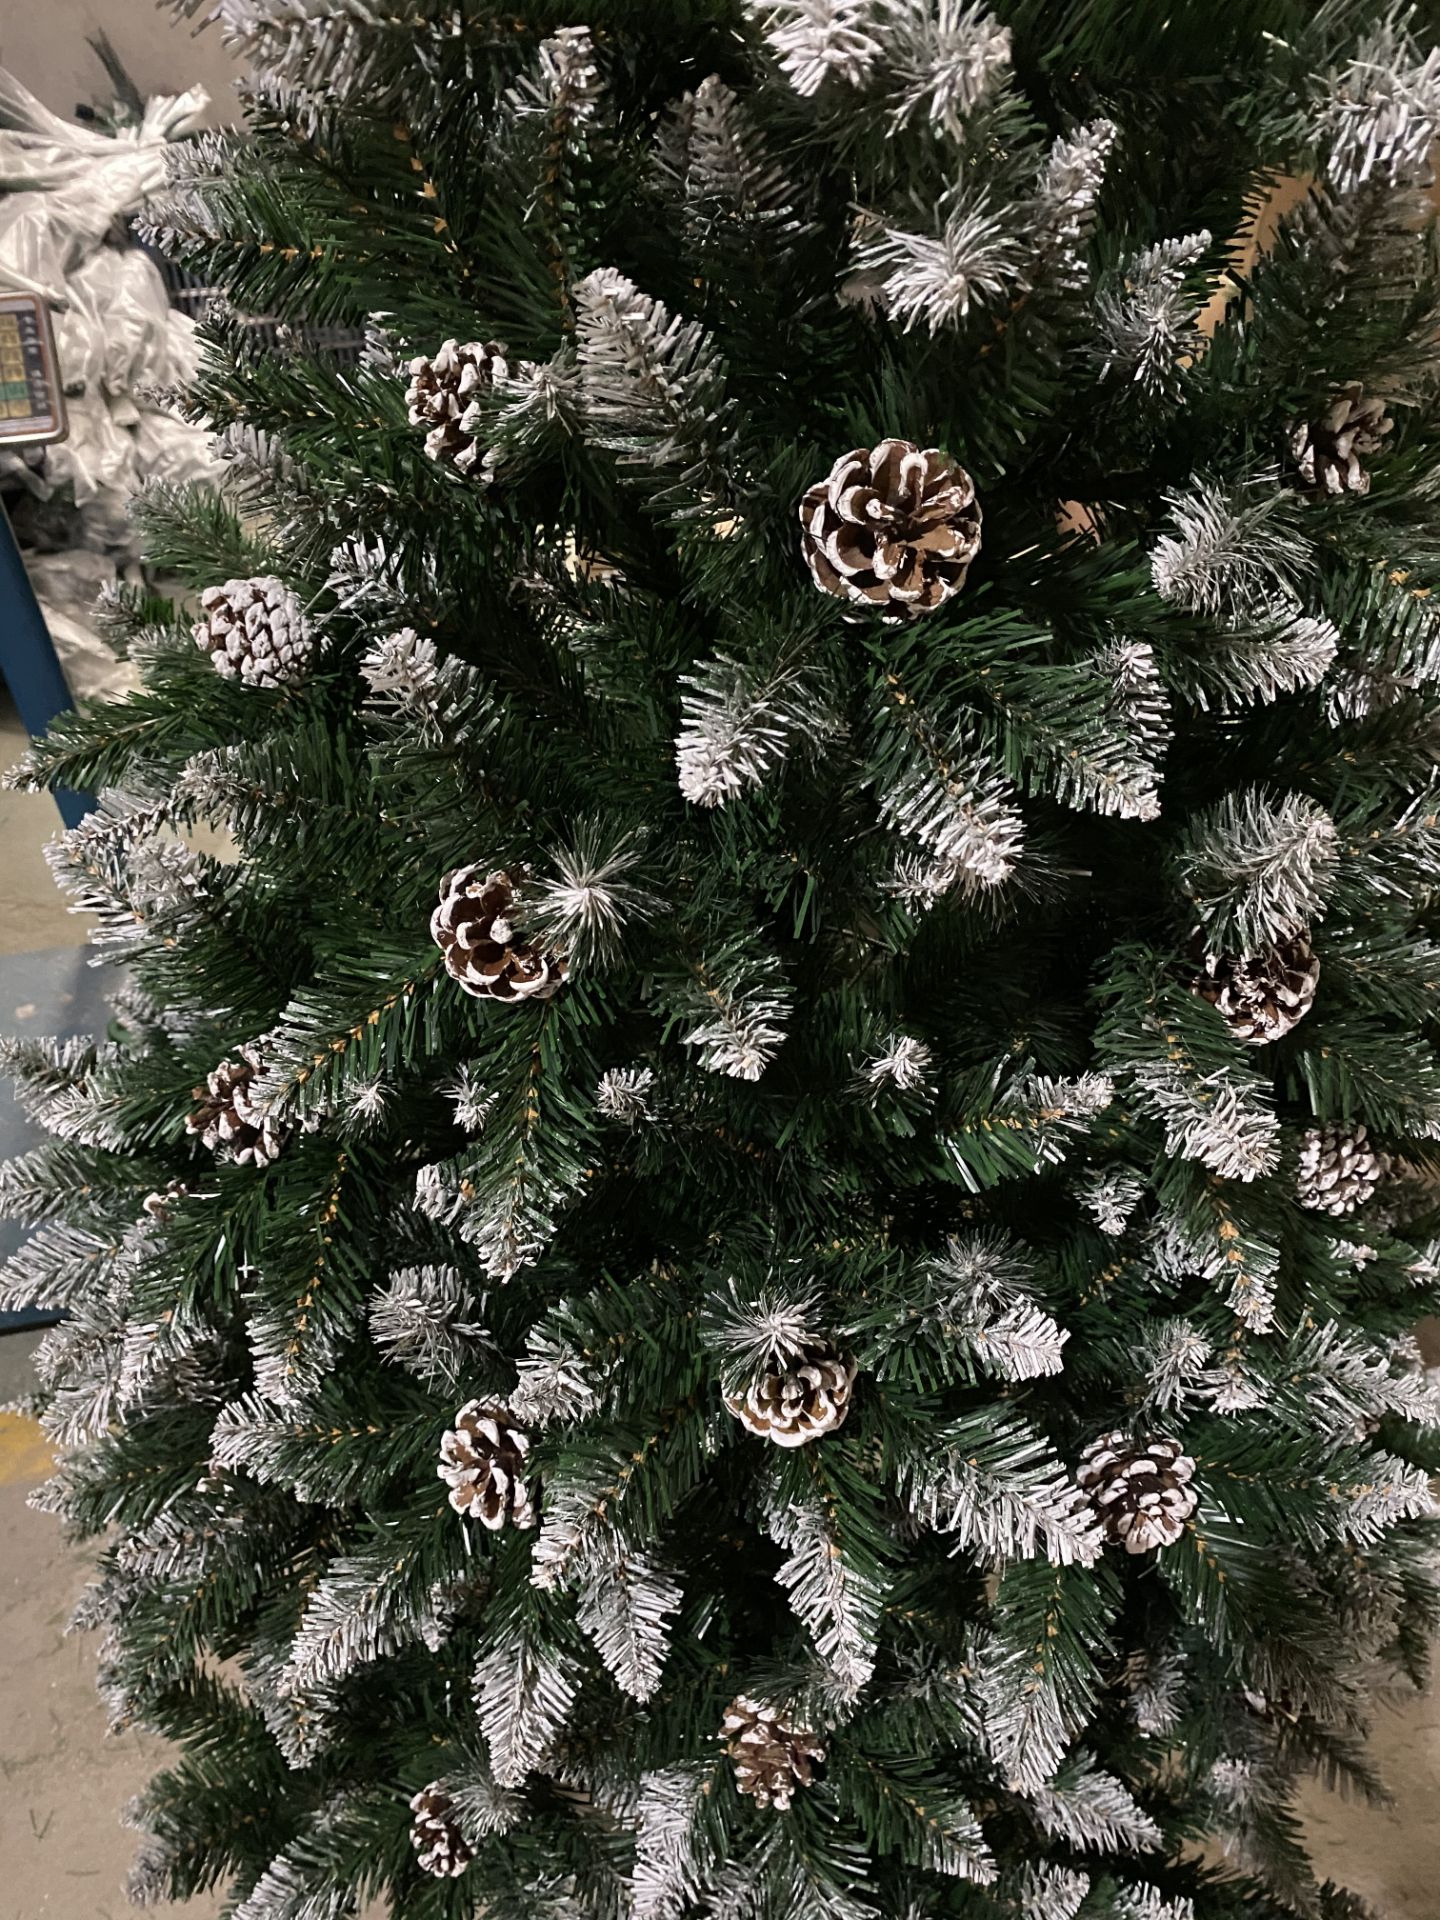 5 x Christmas Tree Artificial with Snow Frosted Tips and Pine Cones 6ft - Image 3 of 4